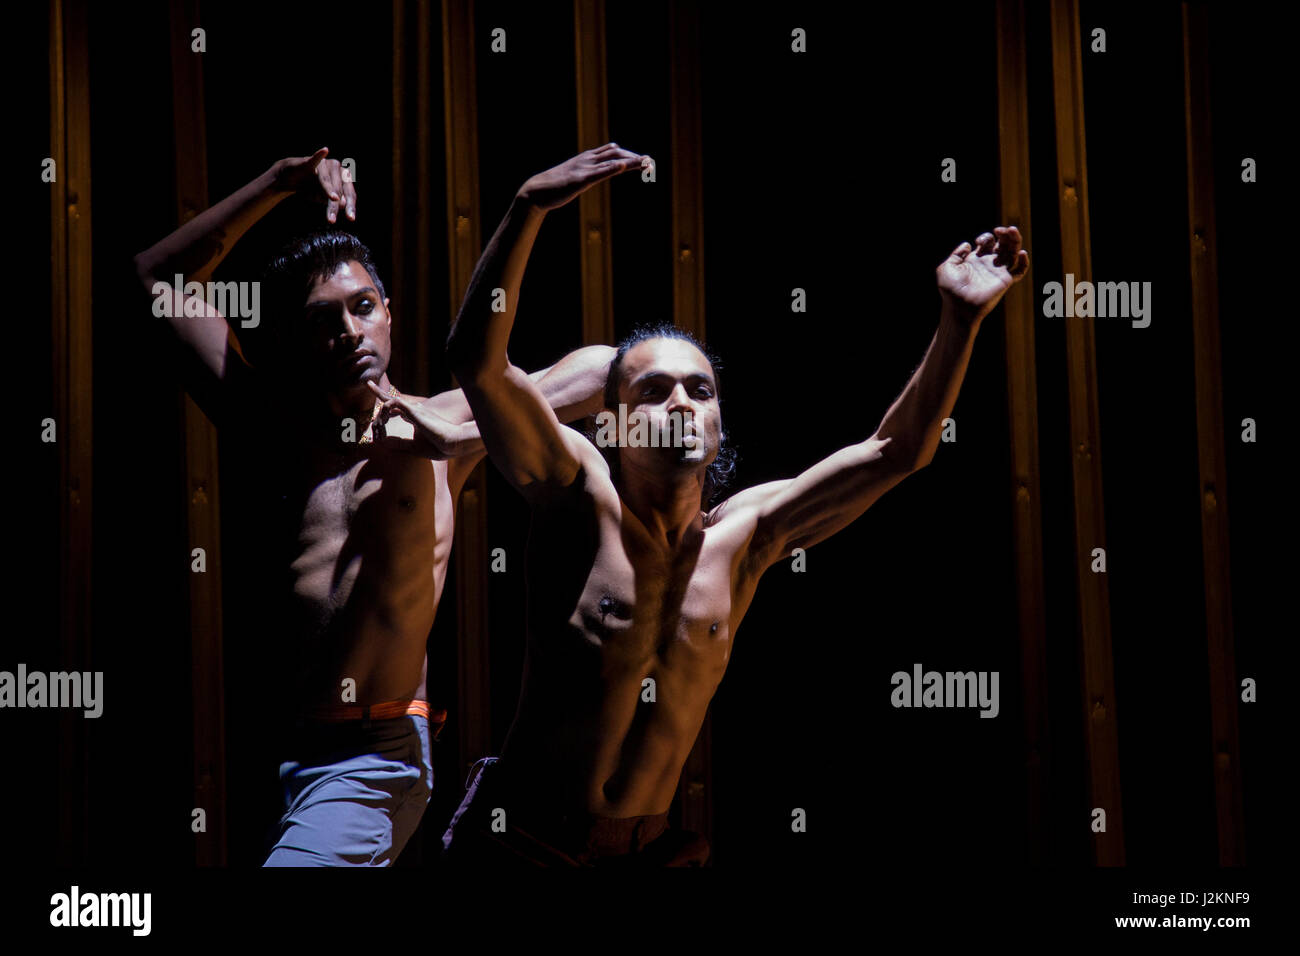 London, UK. 28 April 2017. L-R: Sooraj Subramaniam, Shailesh Bahoran. Photocall for Material Men redux by Shobana Jeyasingh Dance at The Place in Euston. The two dancers Sooraj Subramaniam and Shailesh Bahoran explore the violence of loss and the creation of new ways of belonging using their contrasting dance styles - classical Indian dance and hip hop - choreographed by Shobana Jeyasingh. Stock Photo